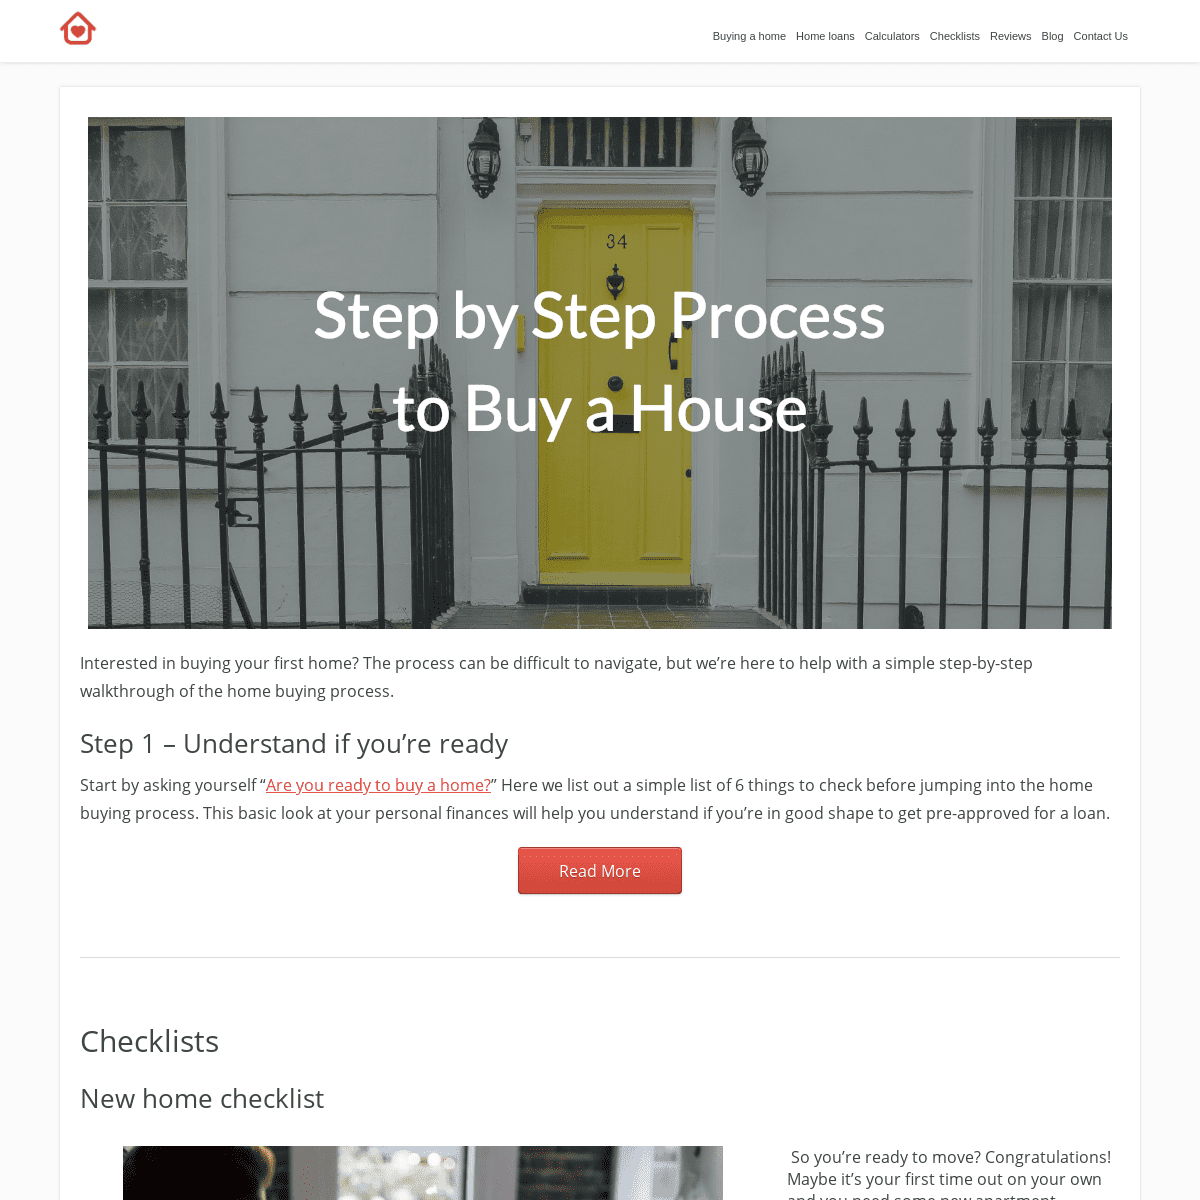 A complete backup of homebuyingchecklist.co